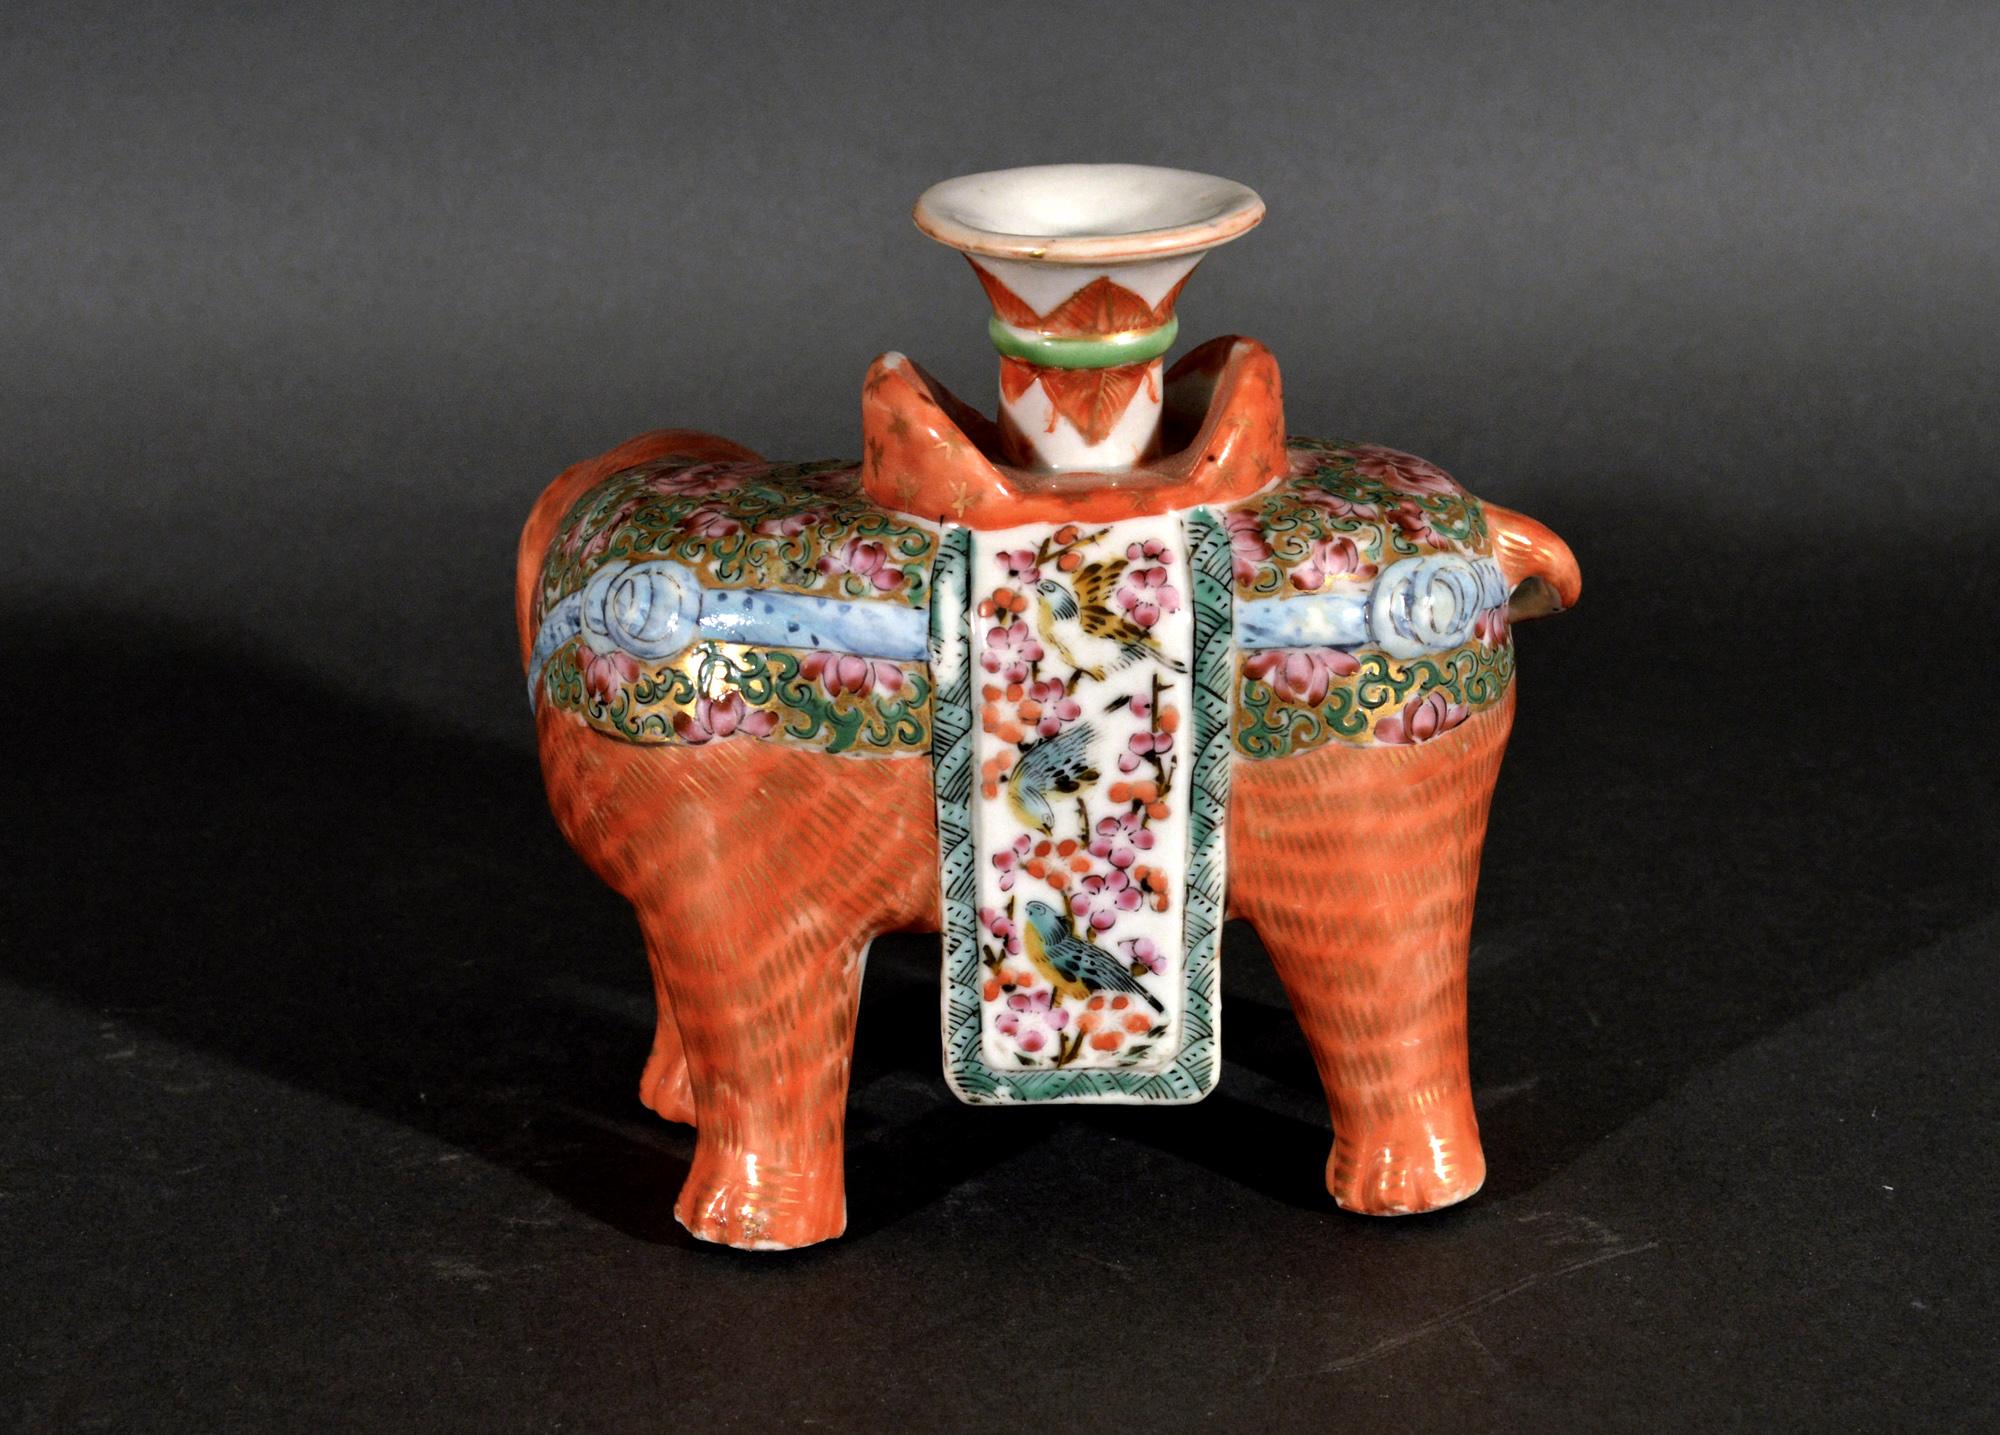 19th Century Chinese Export Porcelain Canton Famille Rose Elephant Modeled as a Candlestick